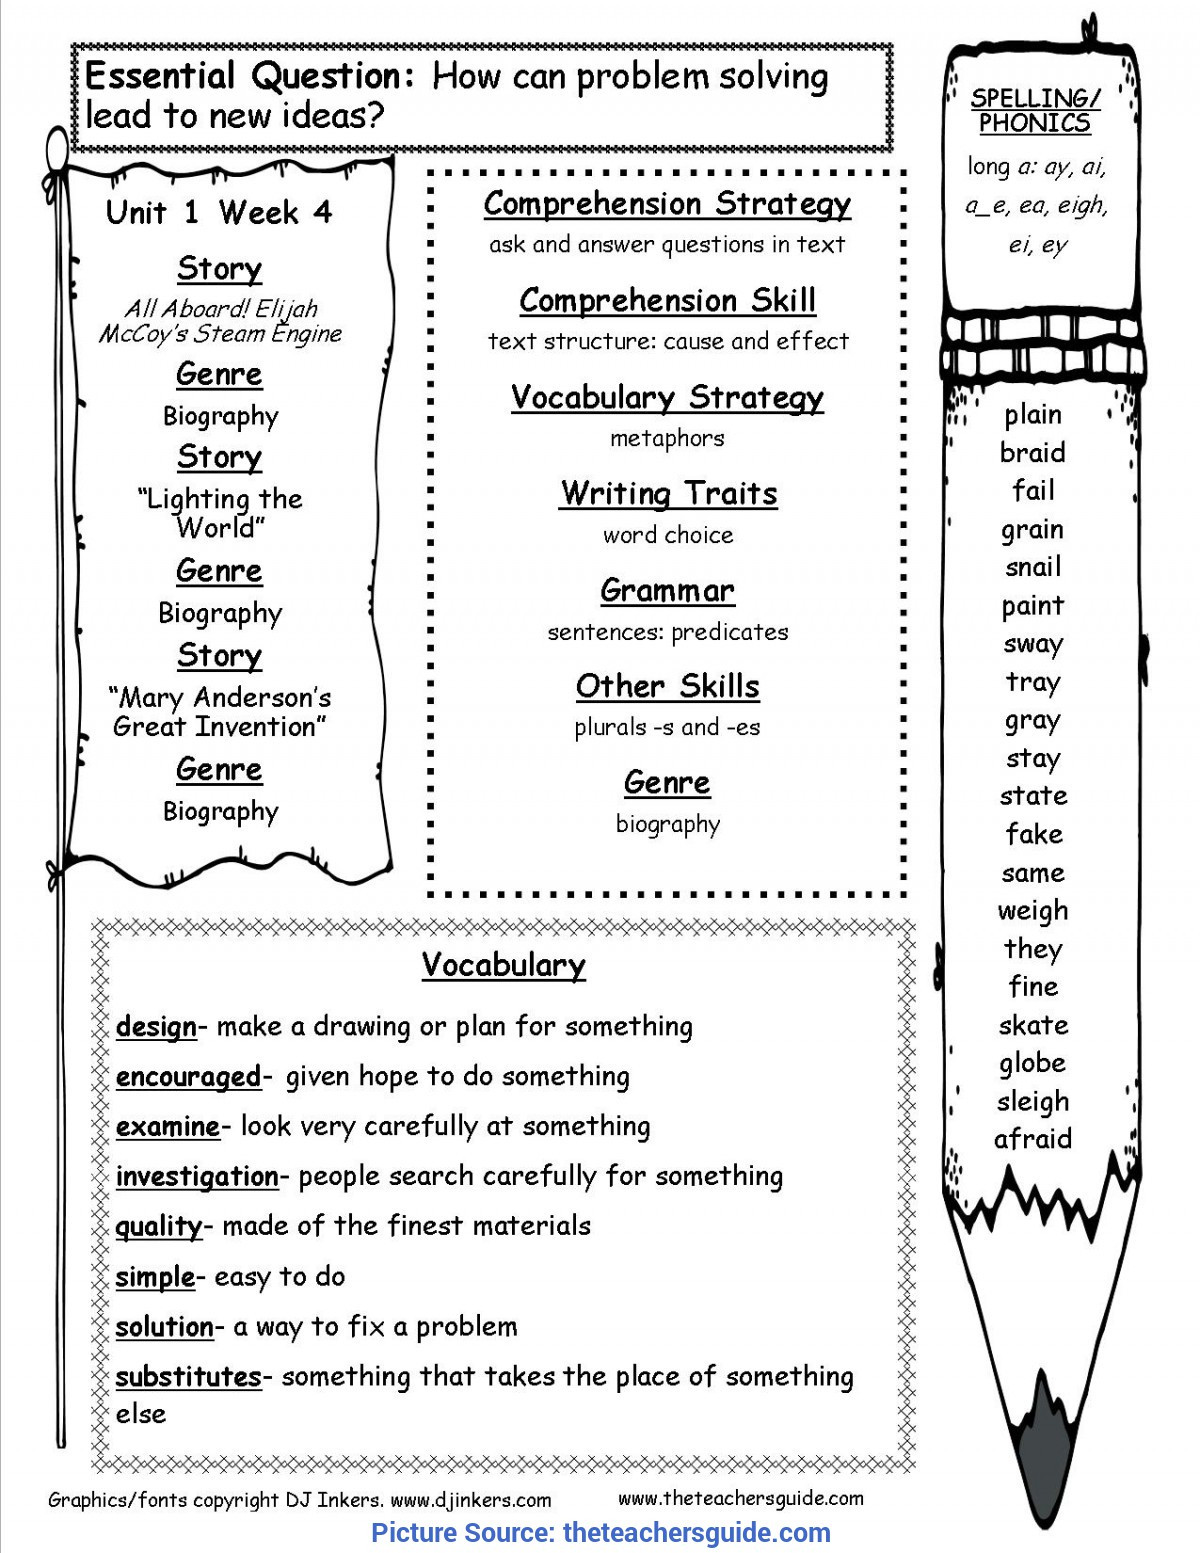 3rd Grade Reading Lesson Plans Special Lesson Plan Template Uk Sted About the 5 Minute